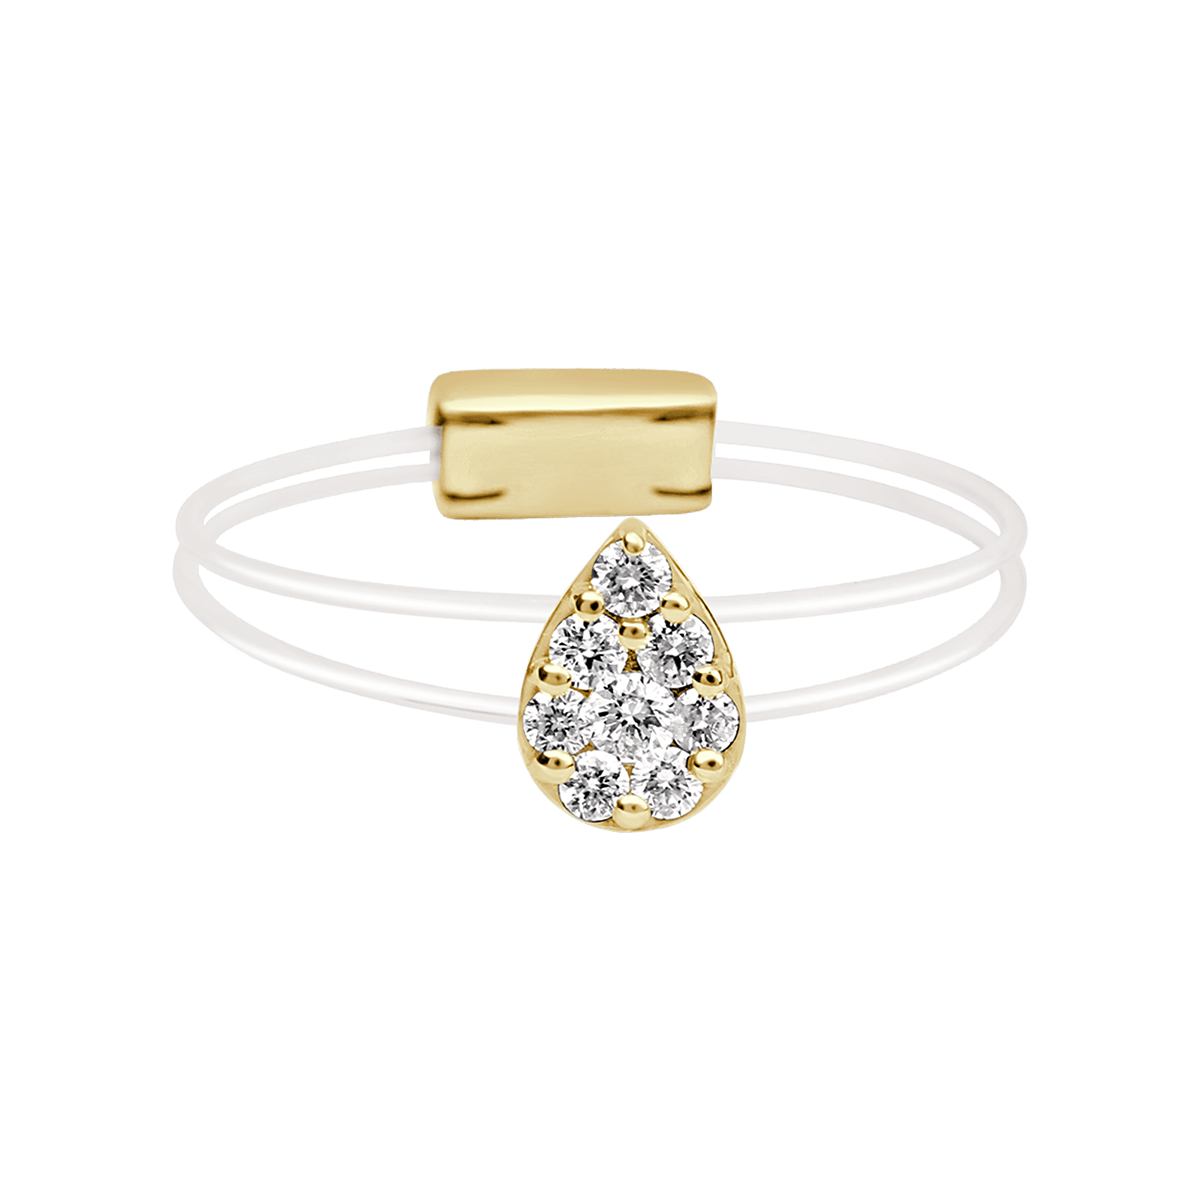 Pear illusion yellow gold ring of Aura collection - horizontal